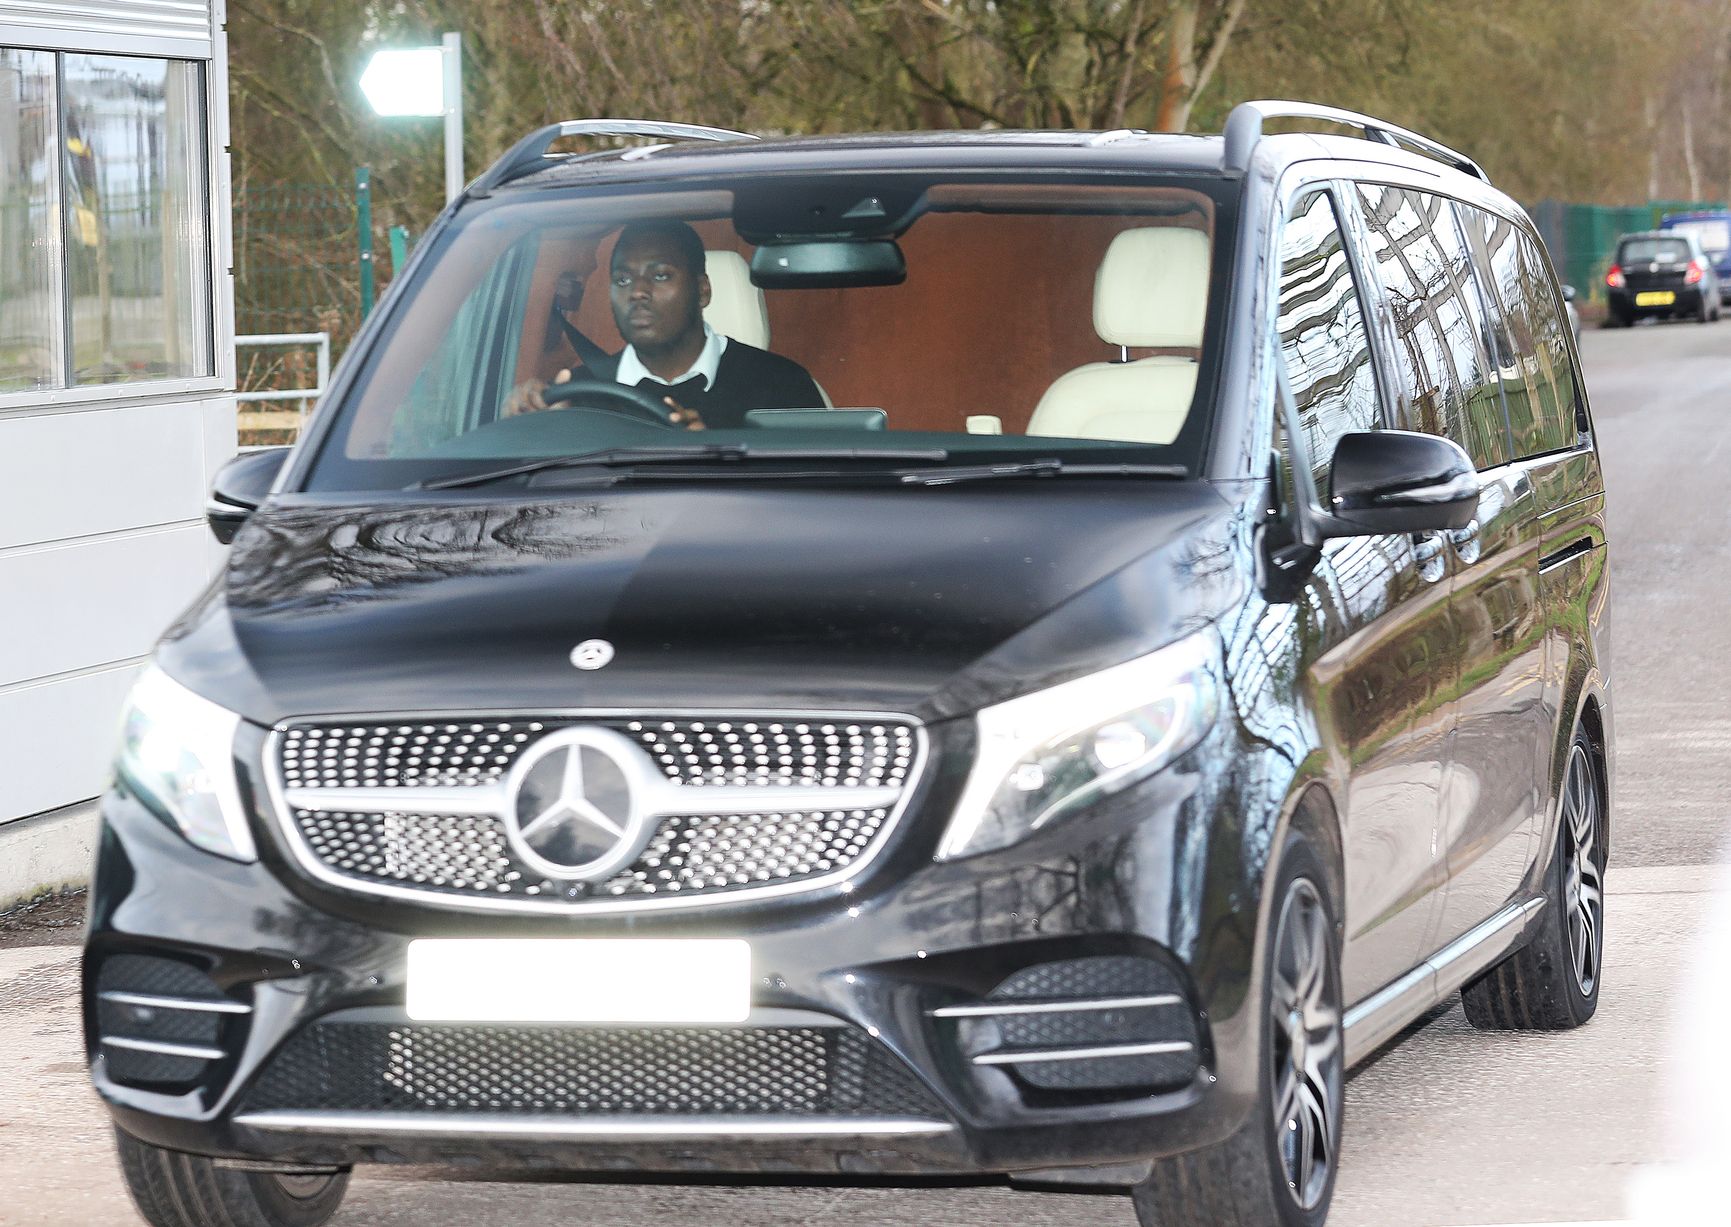 Scott McTominay among Manchester United players arriving at training after Man City win - Bóng Đá